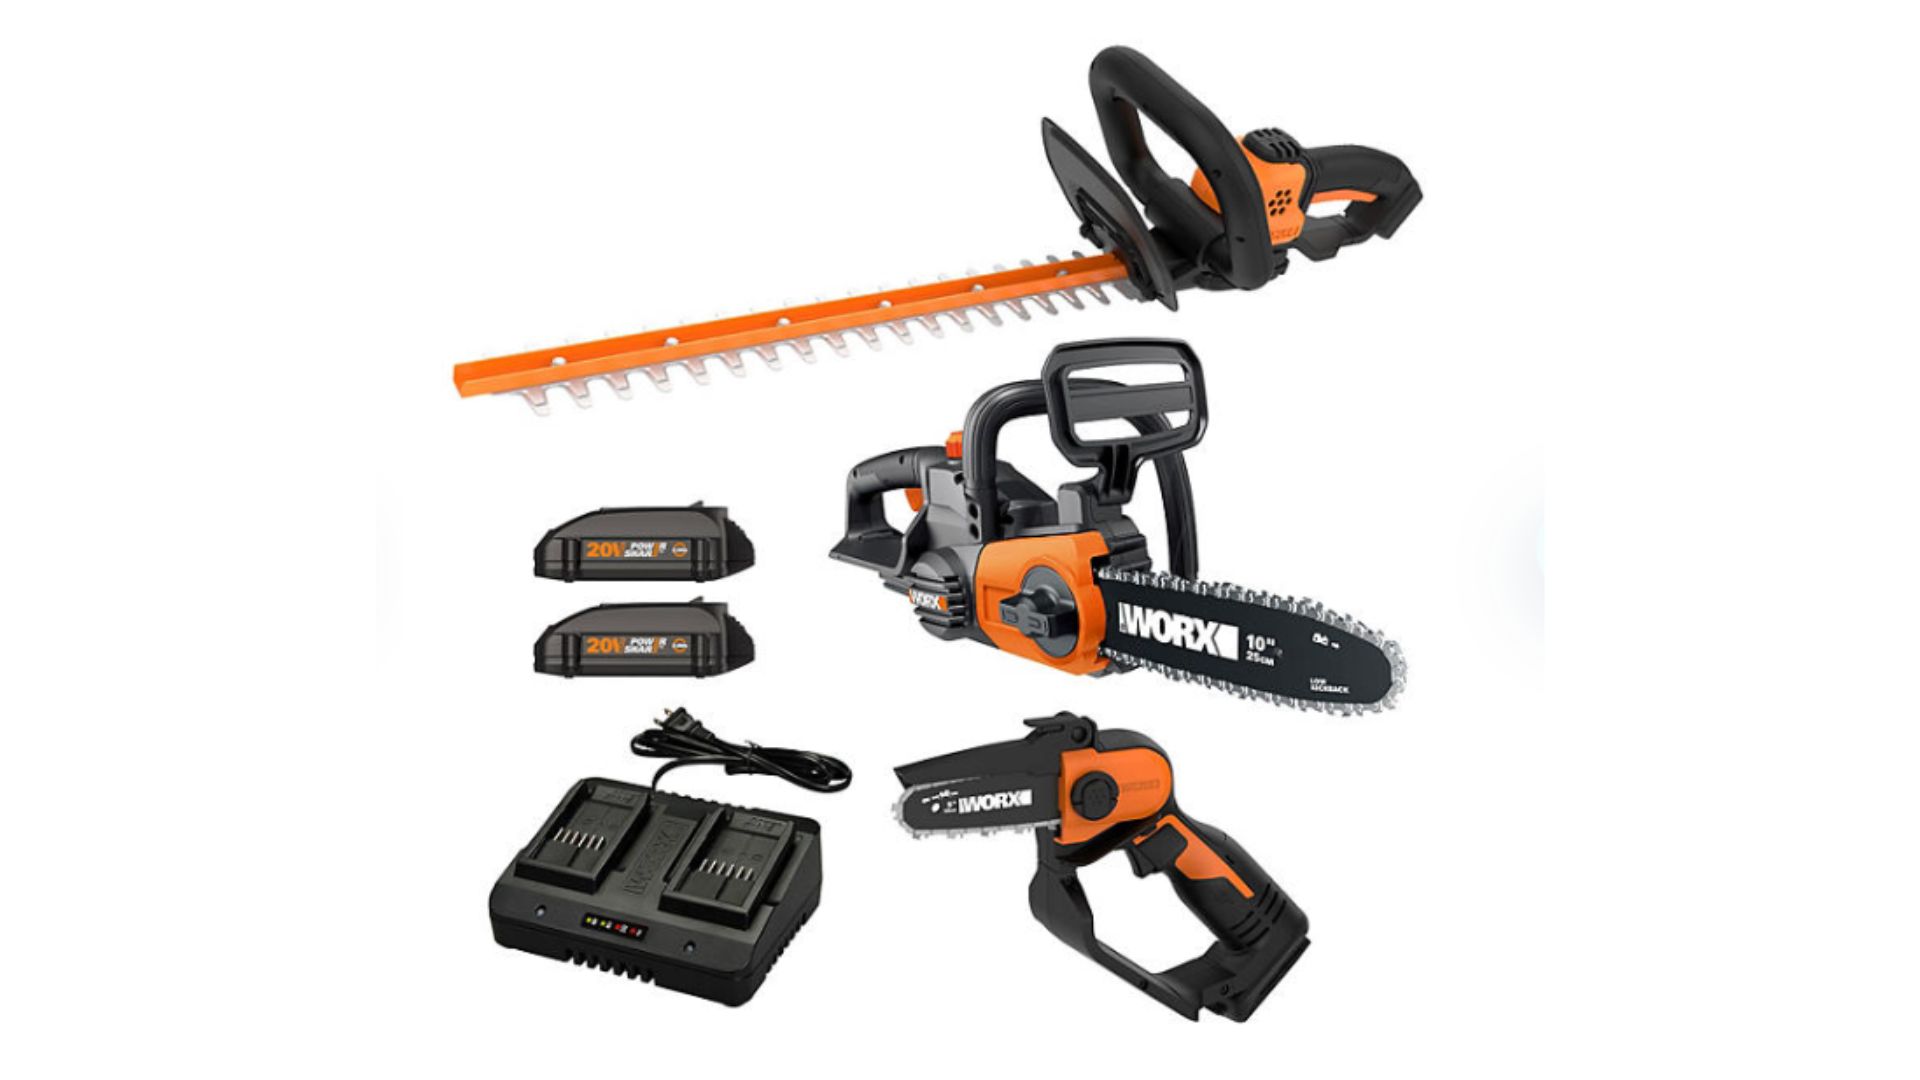 <p>"The spring is precisely when you want to clean up your yard and this is where this cordless lawncare tool set fits in perfectly," said David Bakke, budgeting expert at <a href="https://dollarsanity.com/" rel="noreferrer noopener">DollarSanity</a>. "Plus it's cordless for added convenience."</p> <p>Included with this set is a Worx 22-inch hedge trimmer, a 5-inch pruning saw and a 10-inch cordless chainsaw for $149.98, which is $80 off its regular price.</p>